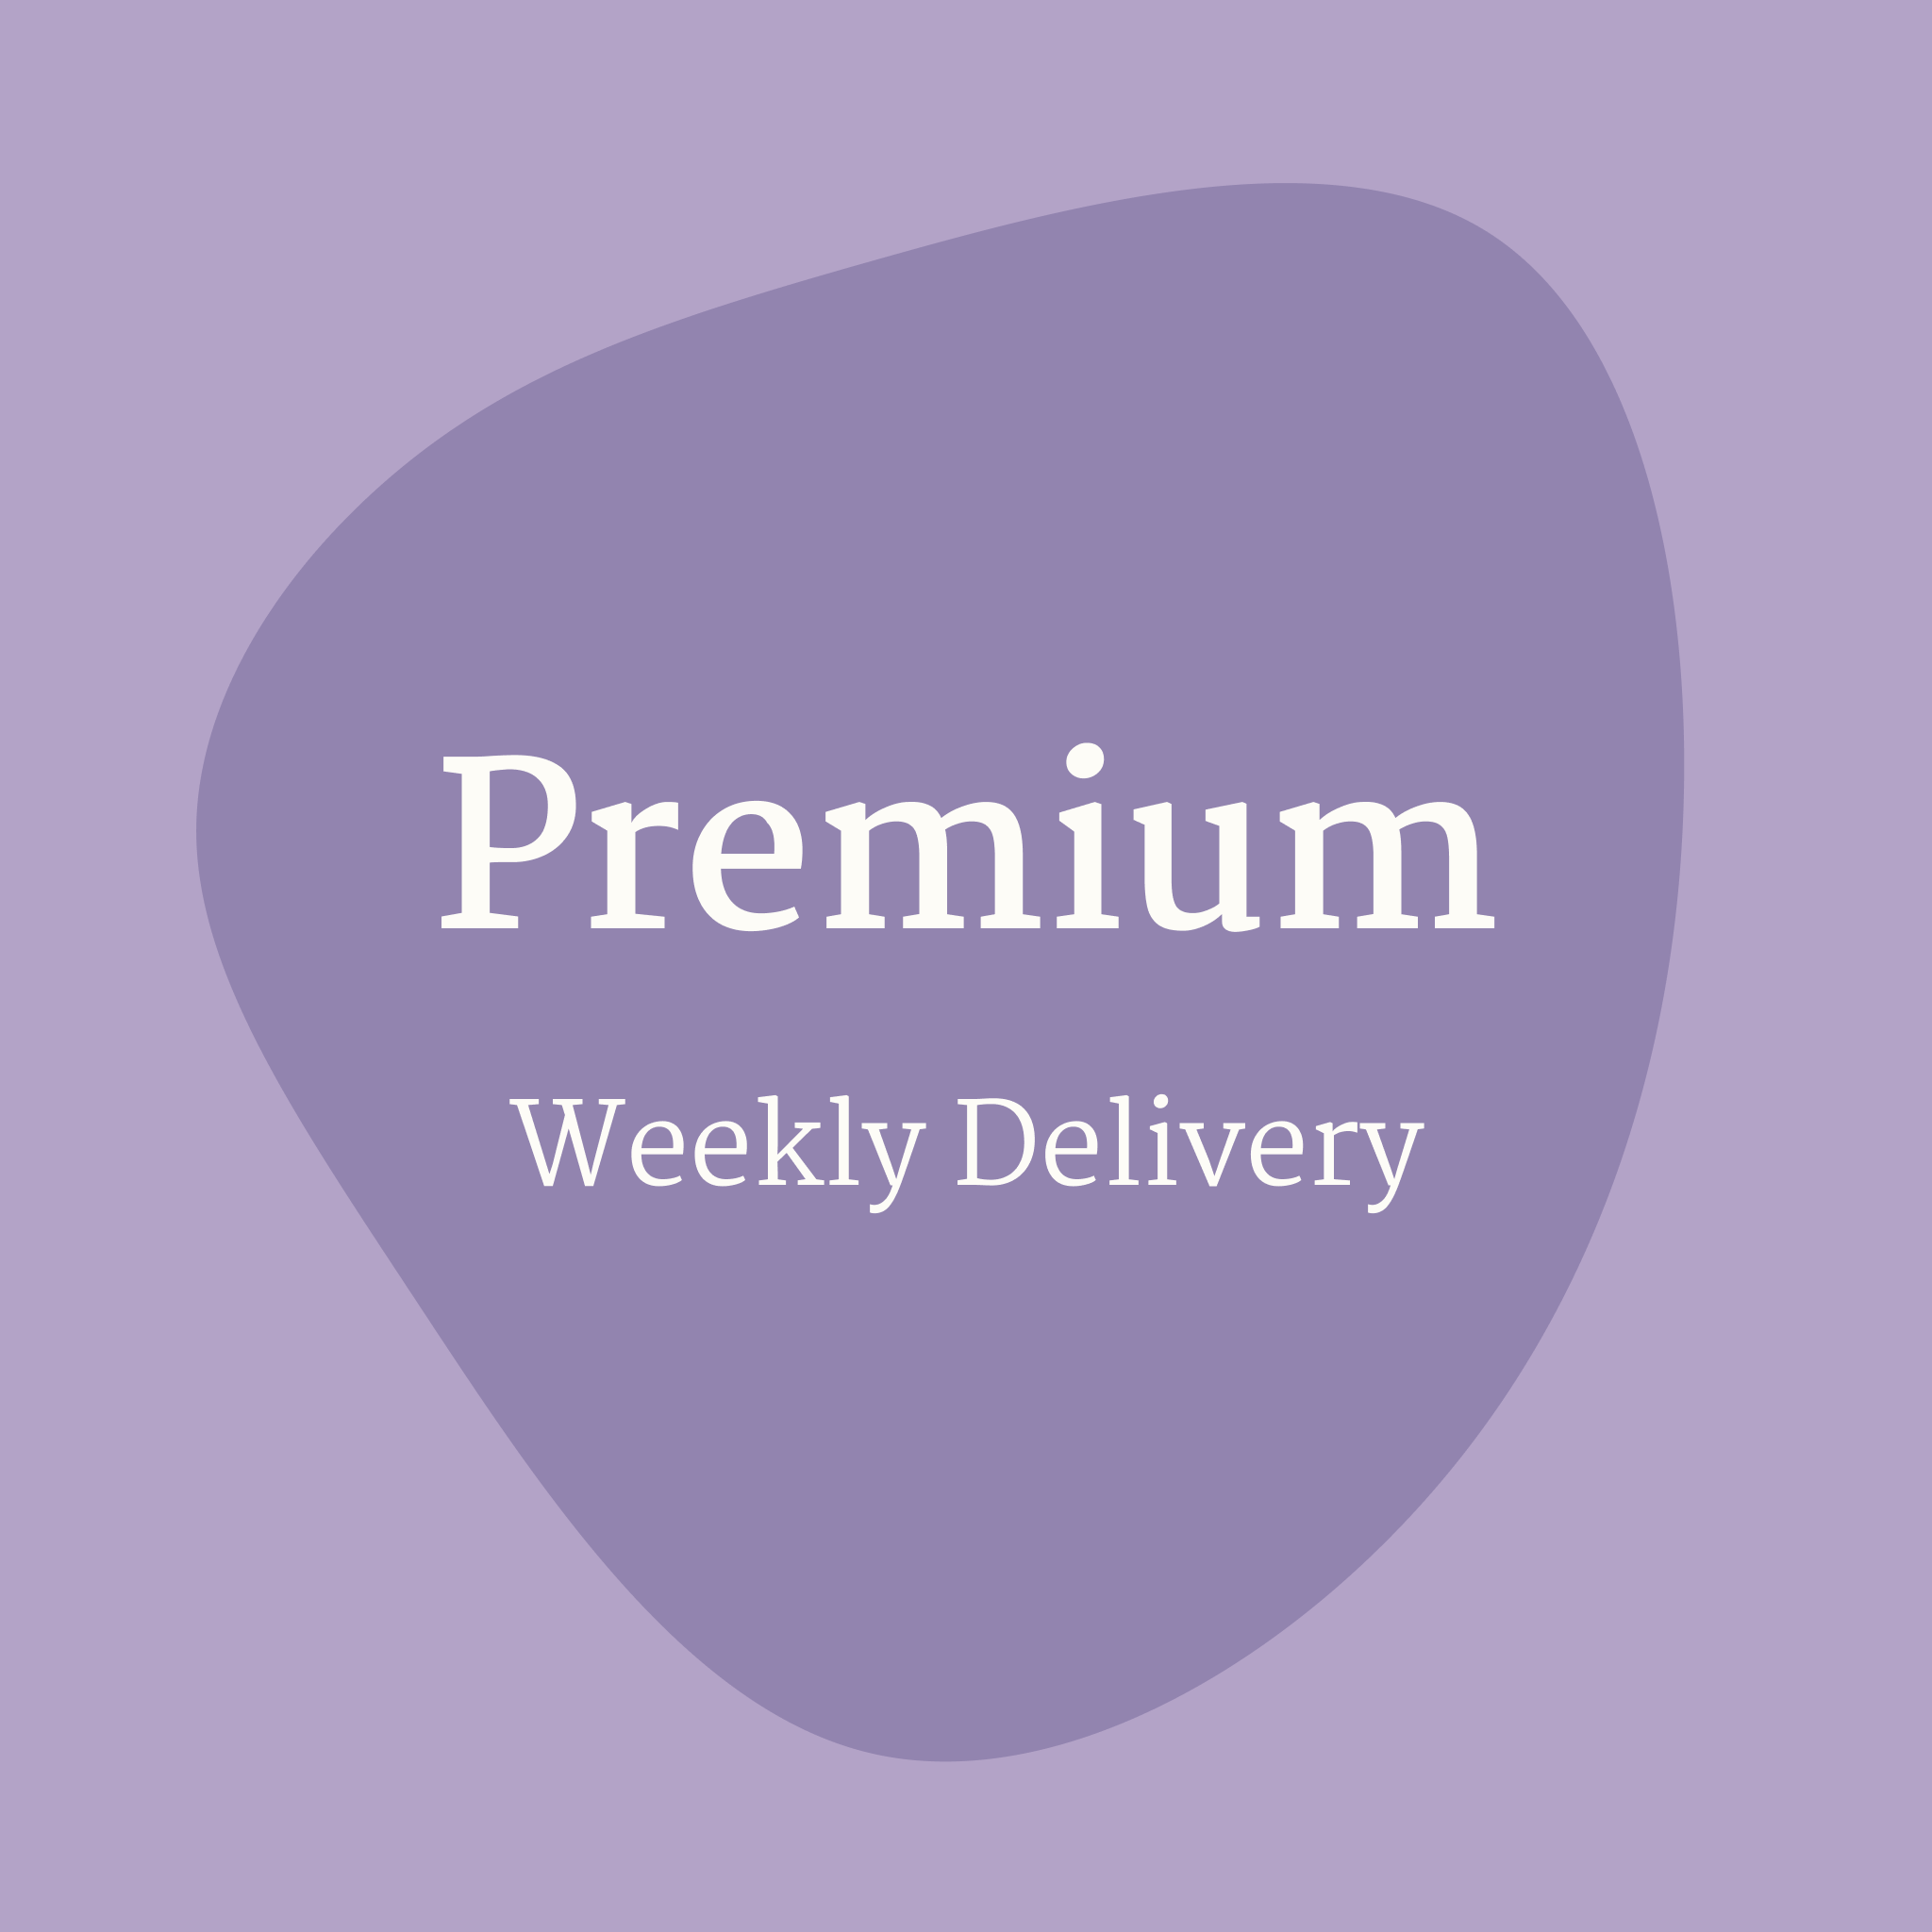 Premium Weekly Delivery